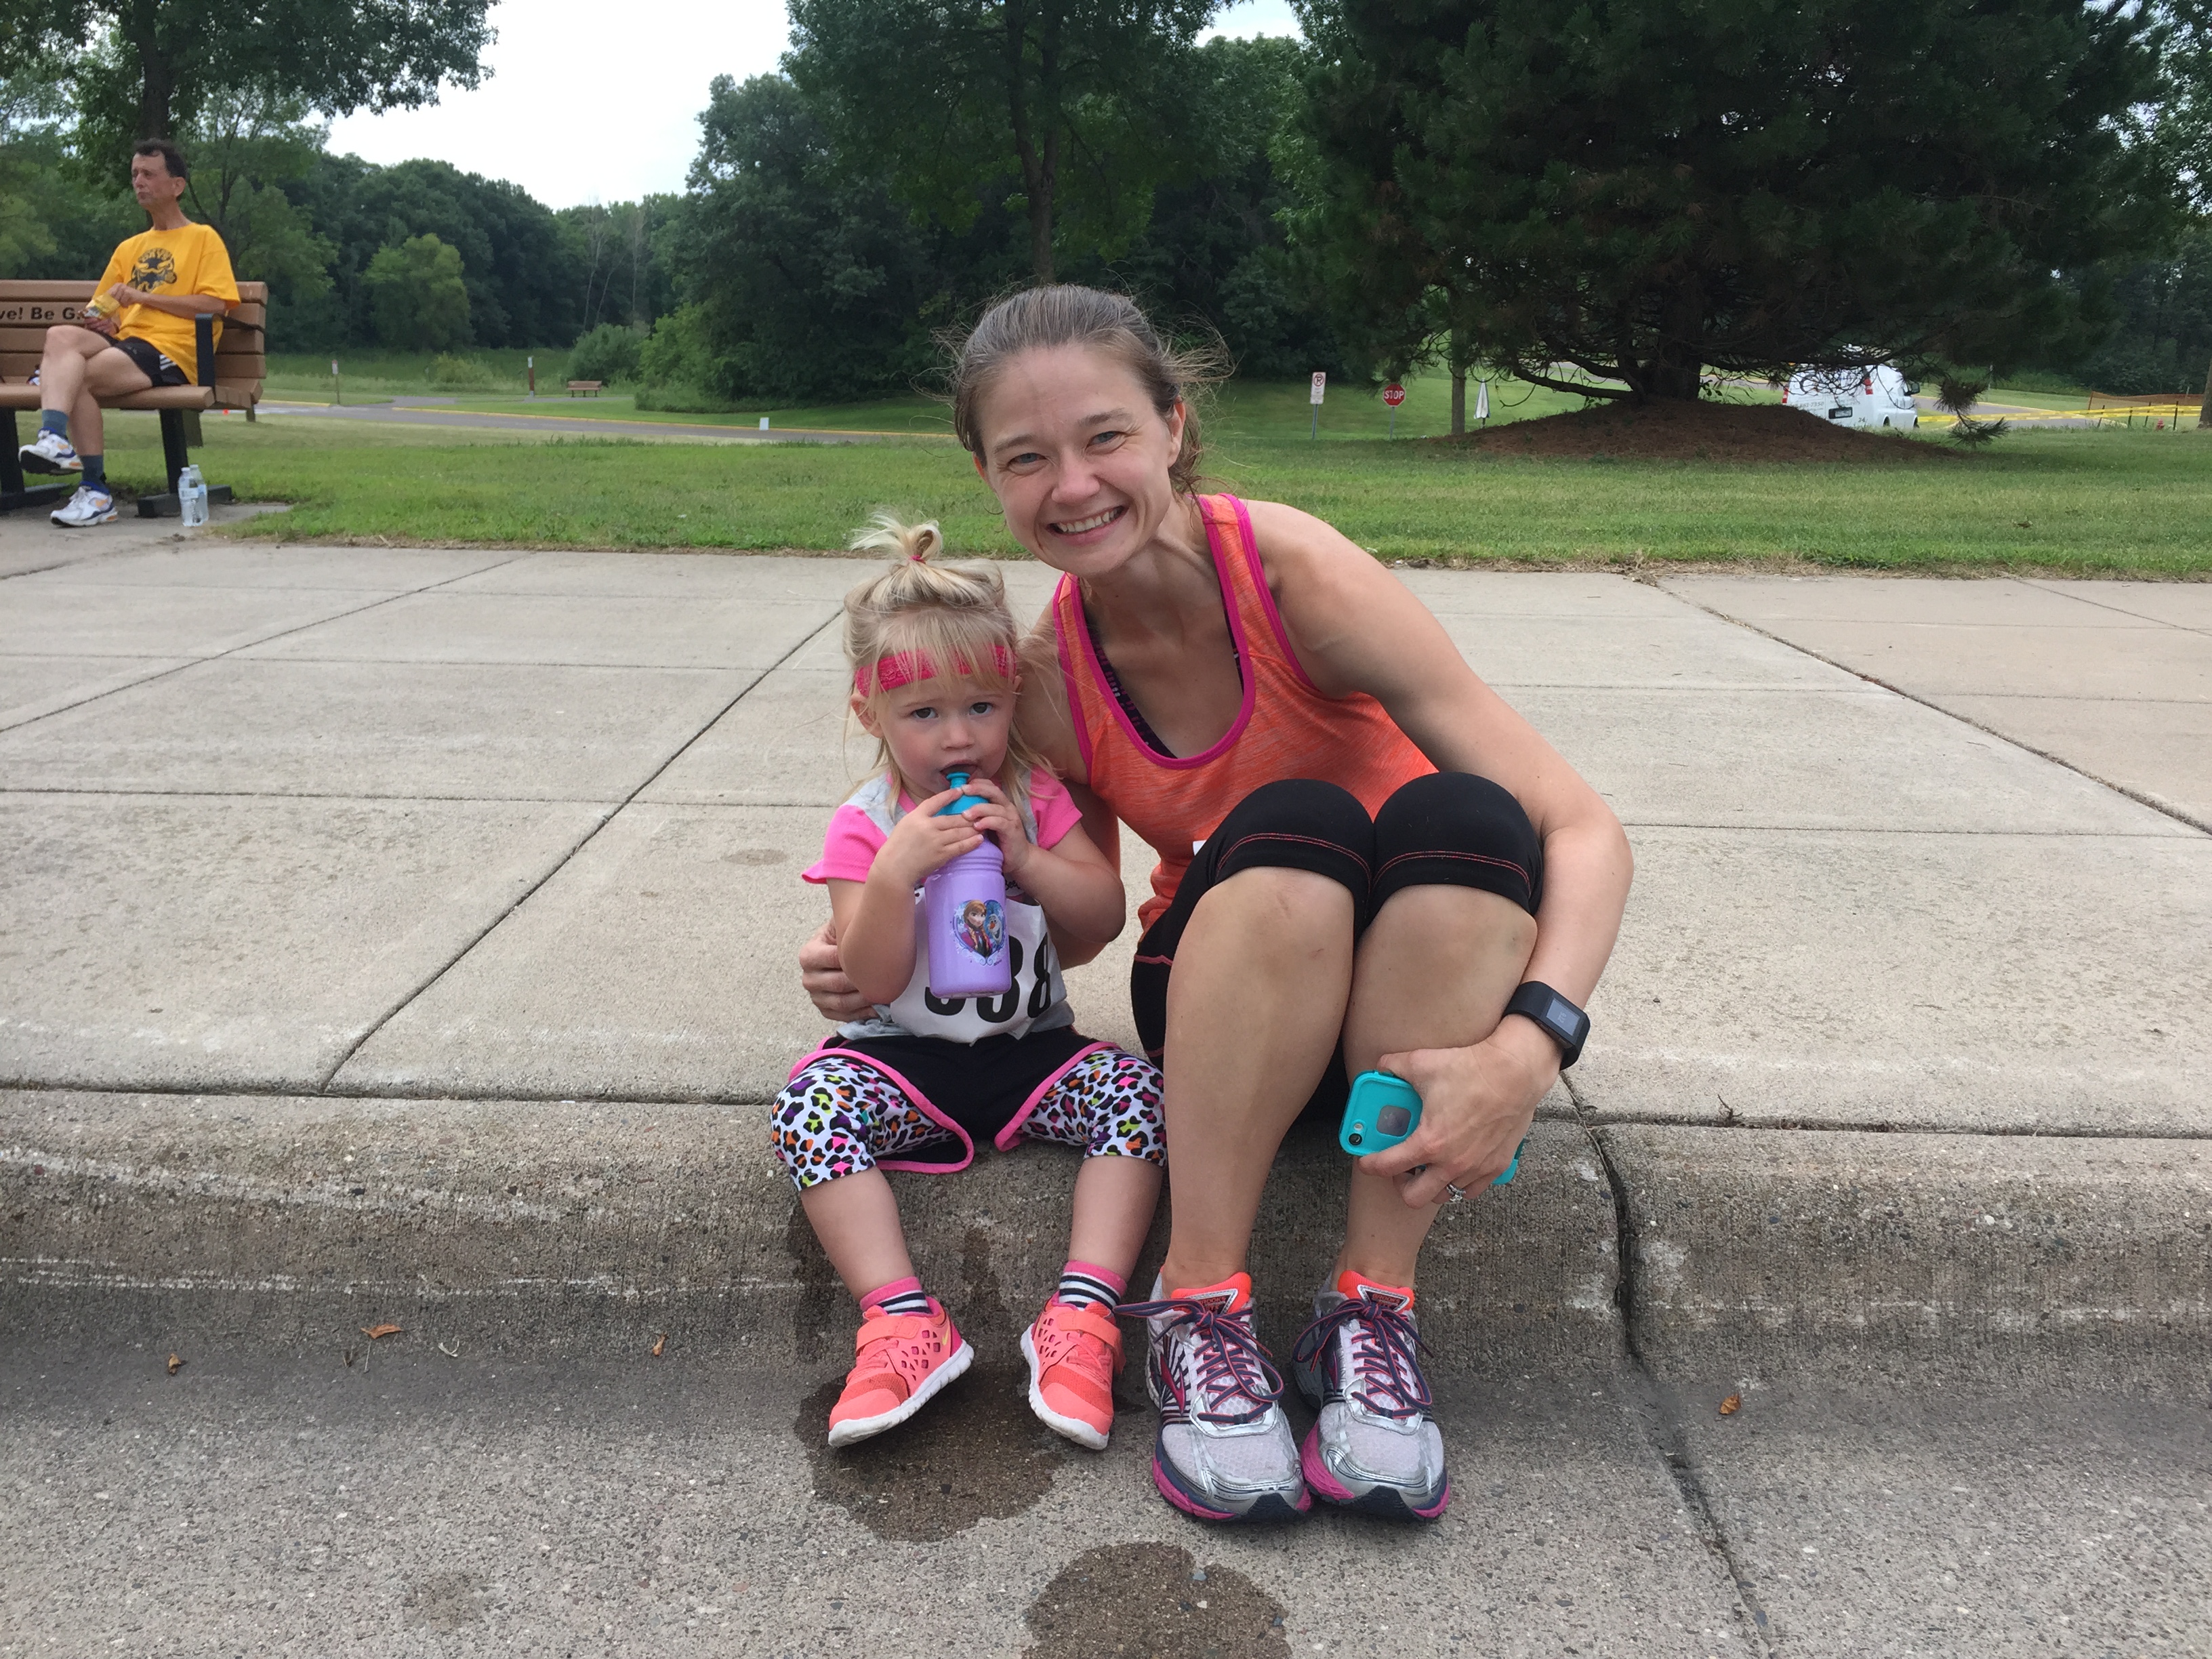 Kenley cooling off after her 2nd race (age 2) with Auntie Jenny, a marathon runner